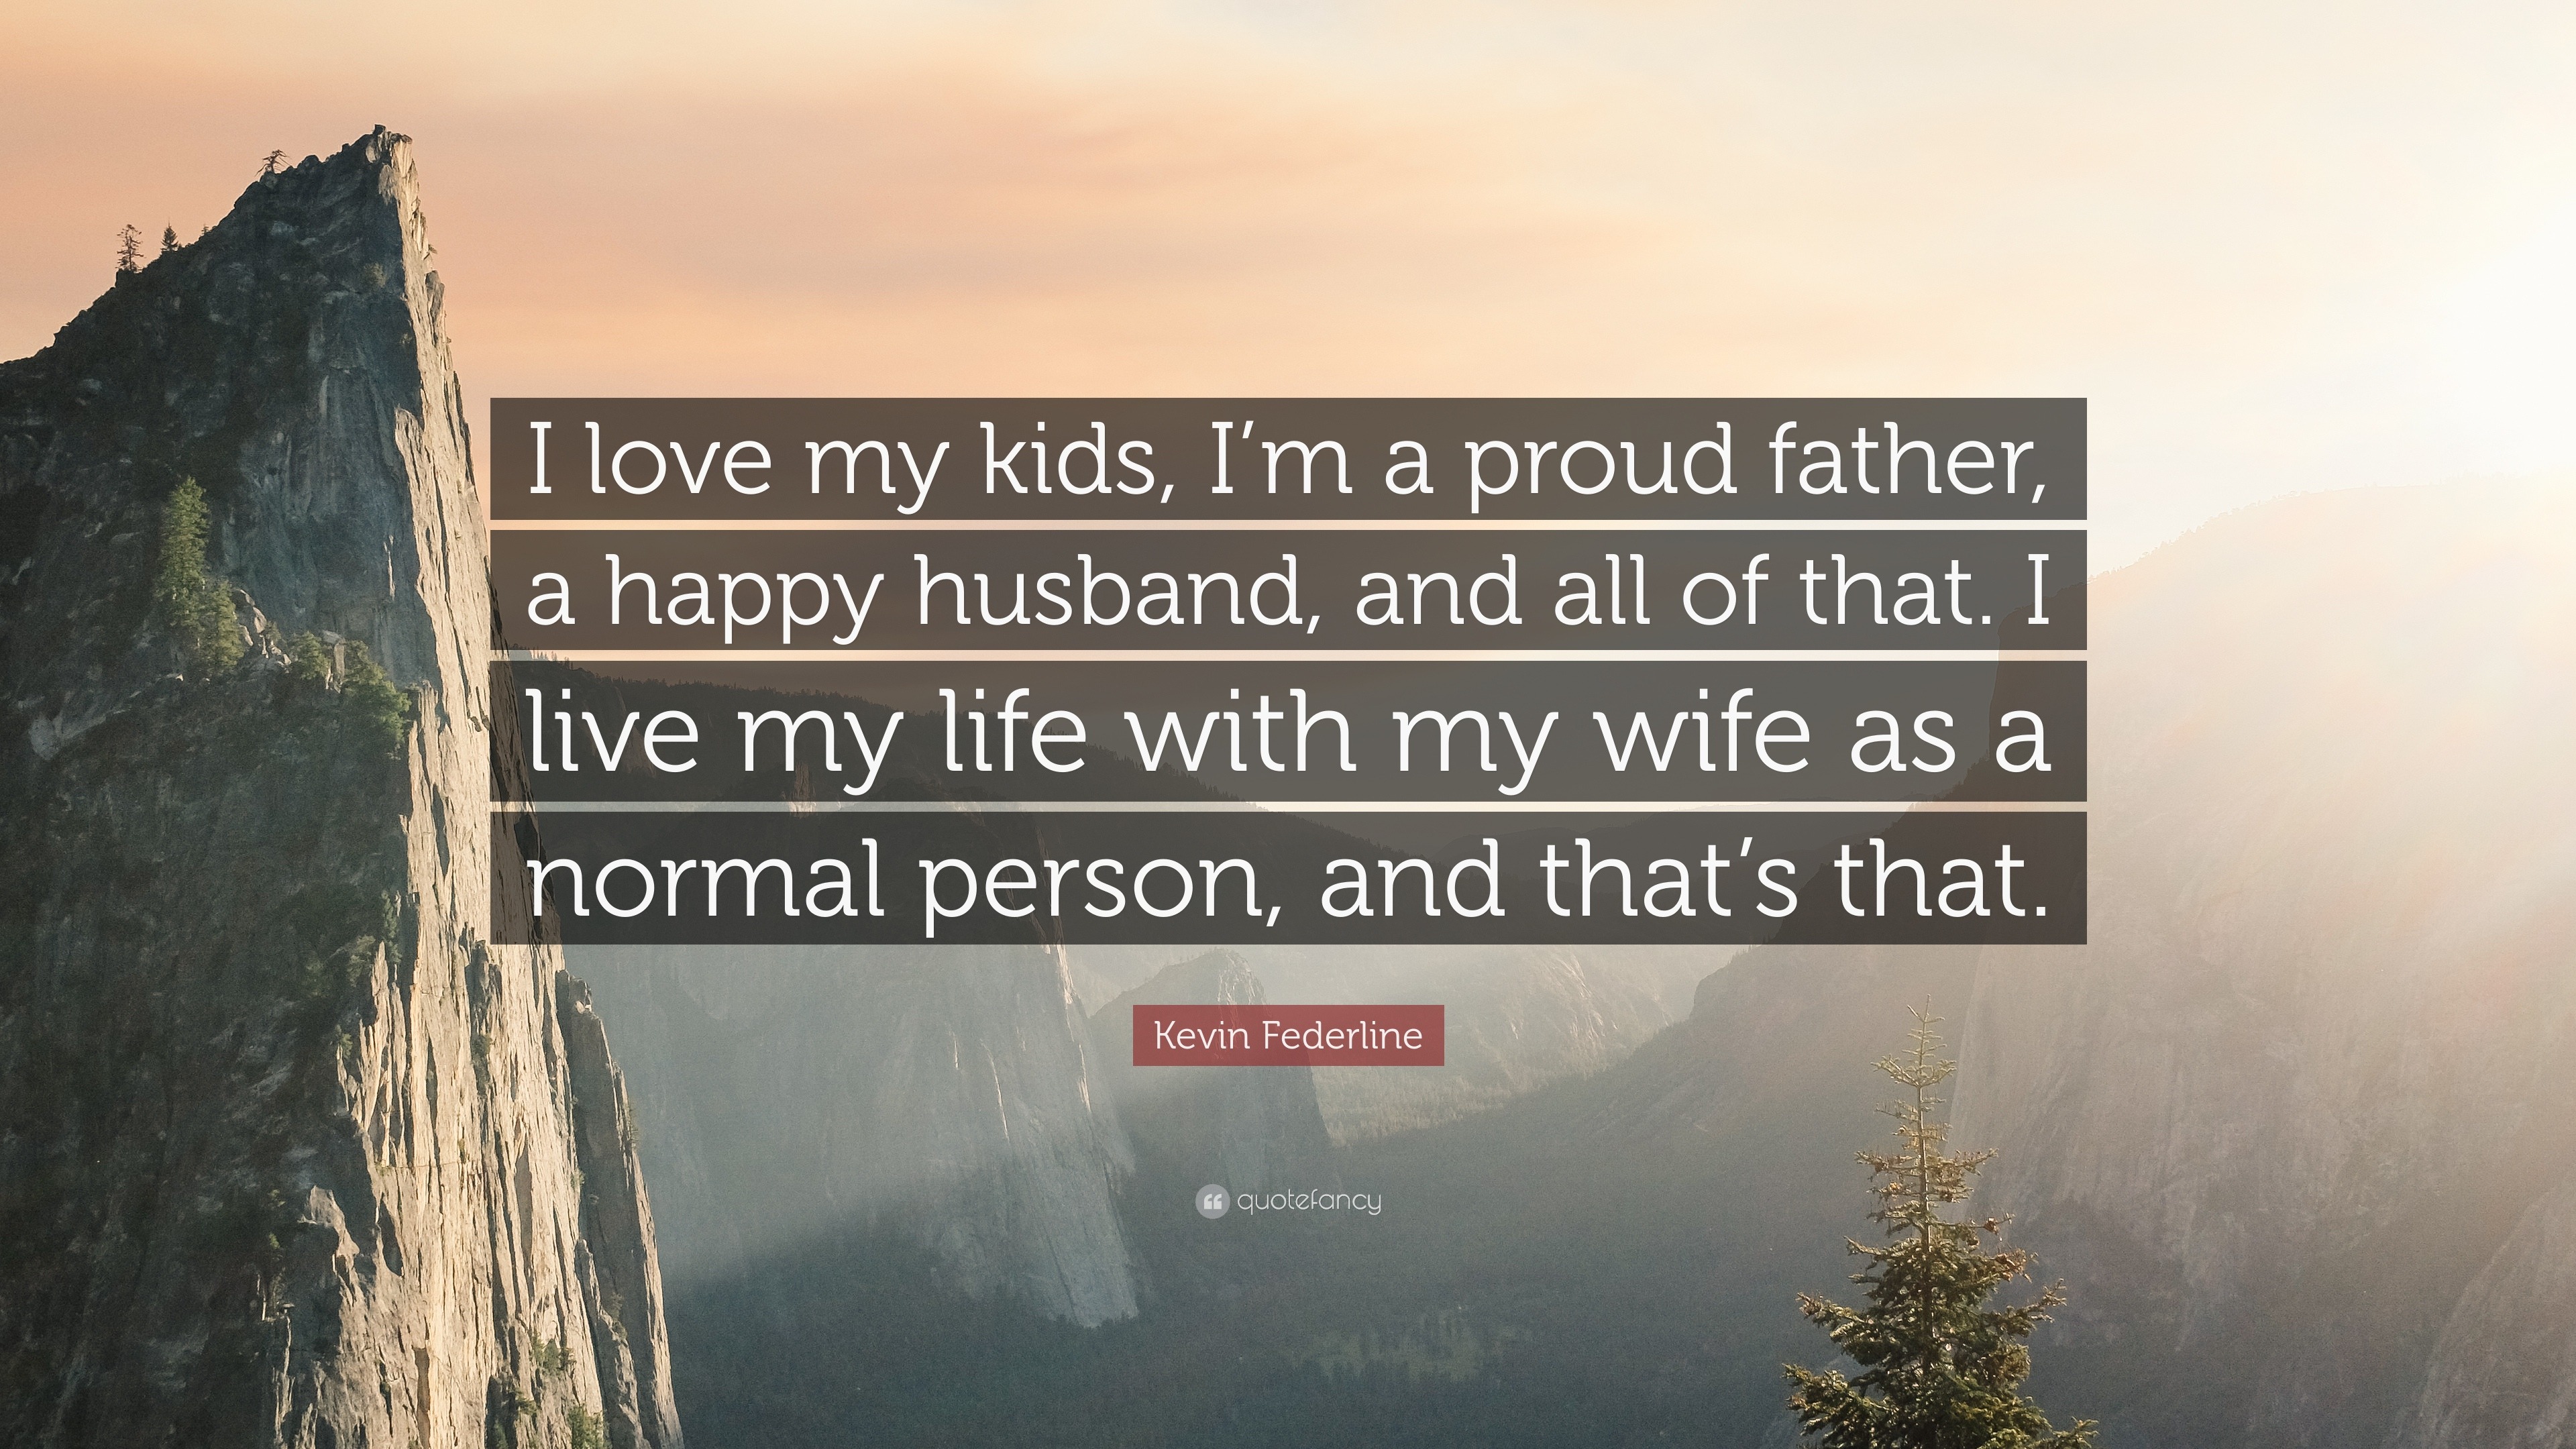 Kevin Federline Quote “I love my kids I m a proud father